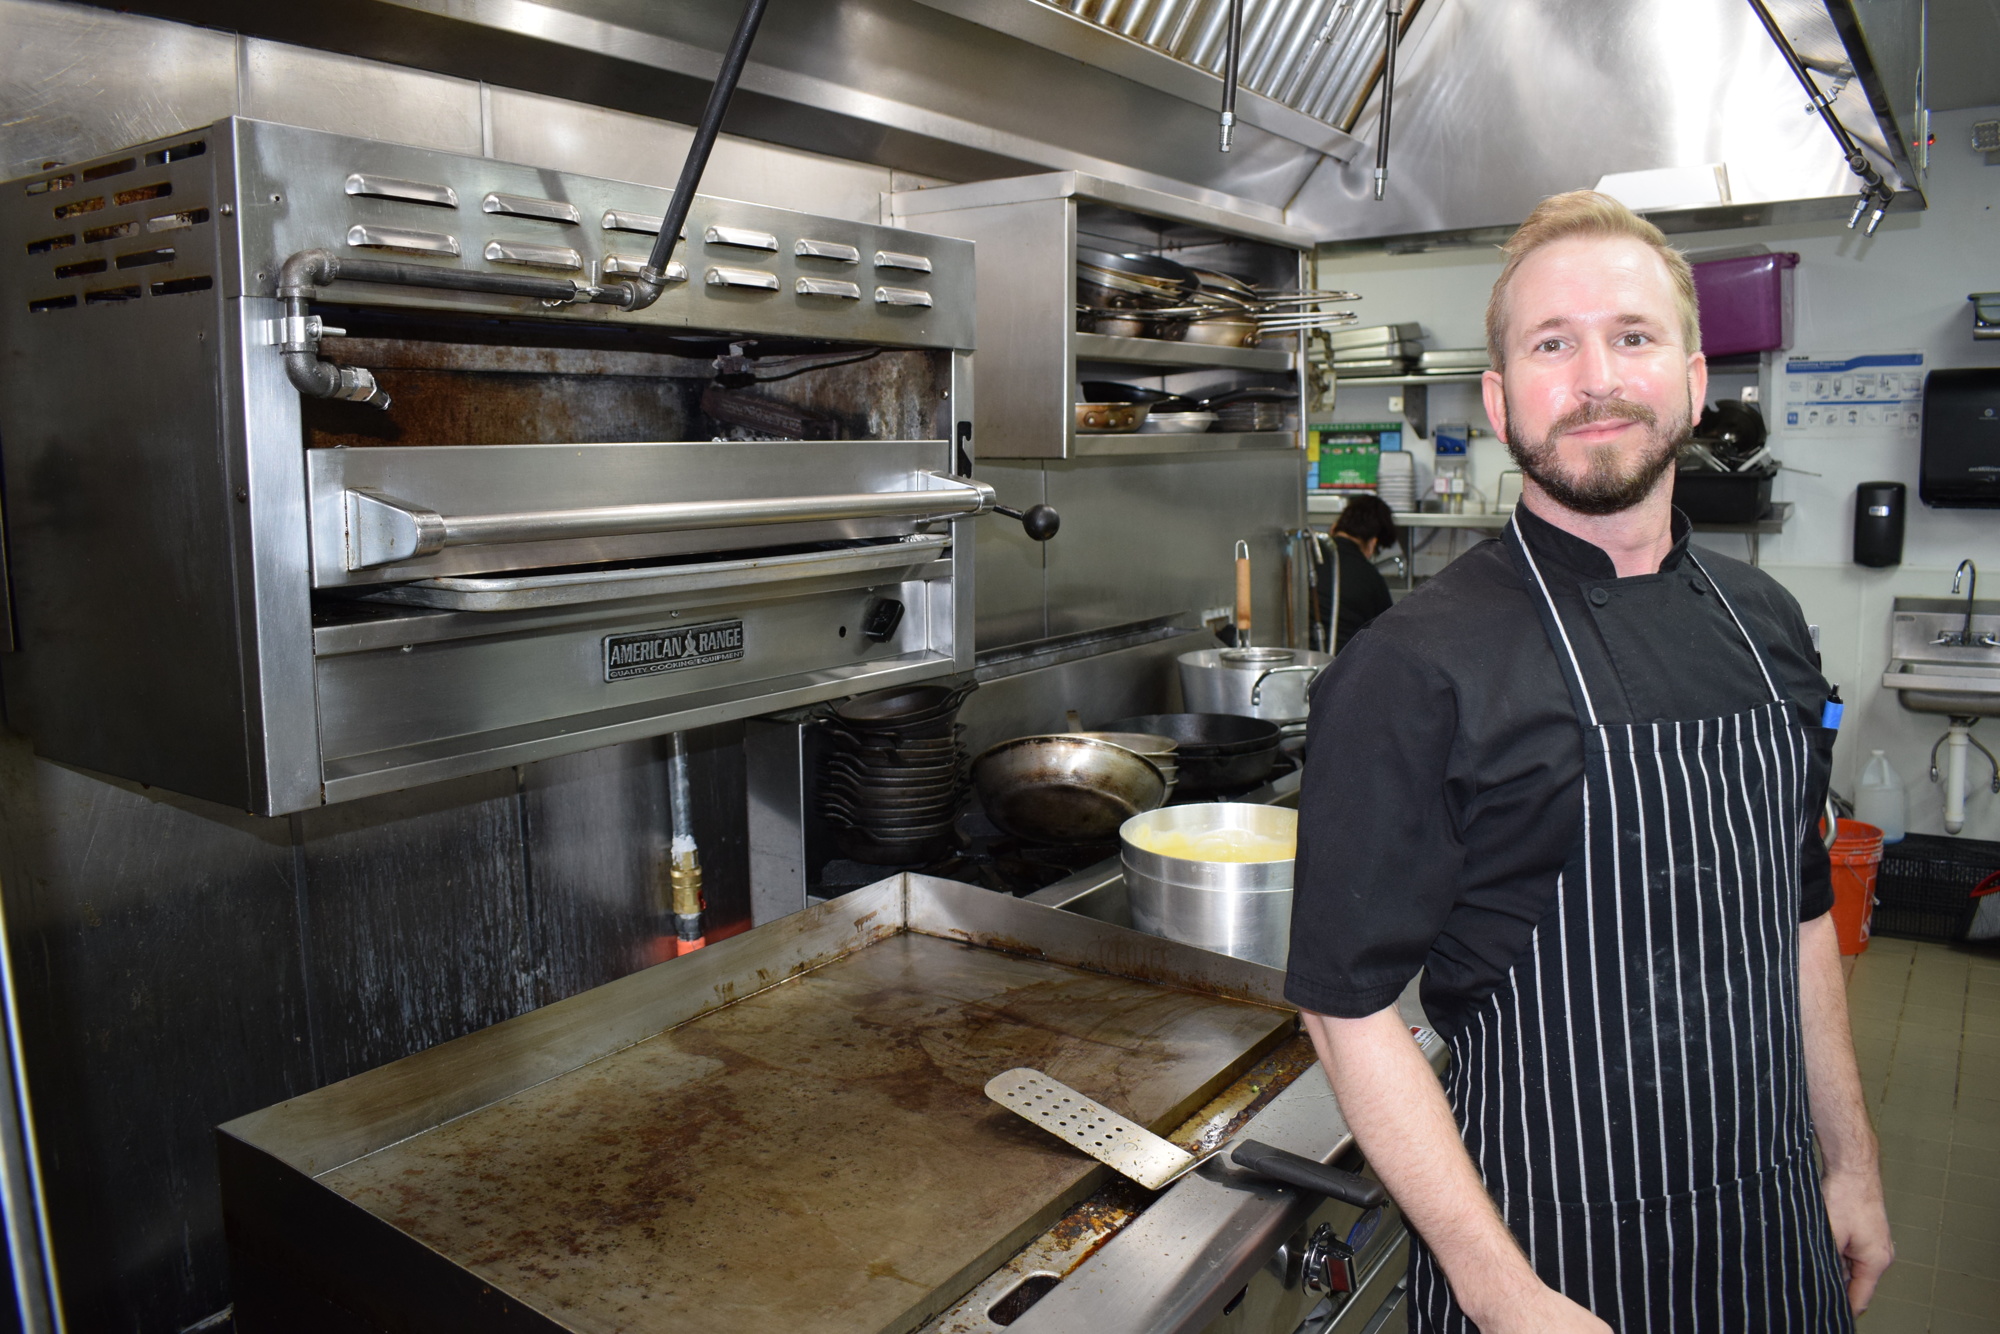 Chef Isaac Johnson moved from Sarasota's Indigenous to head the kitchen at McGrath's Irish Ale House.